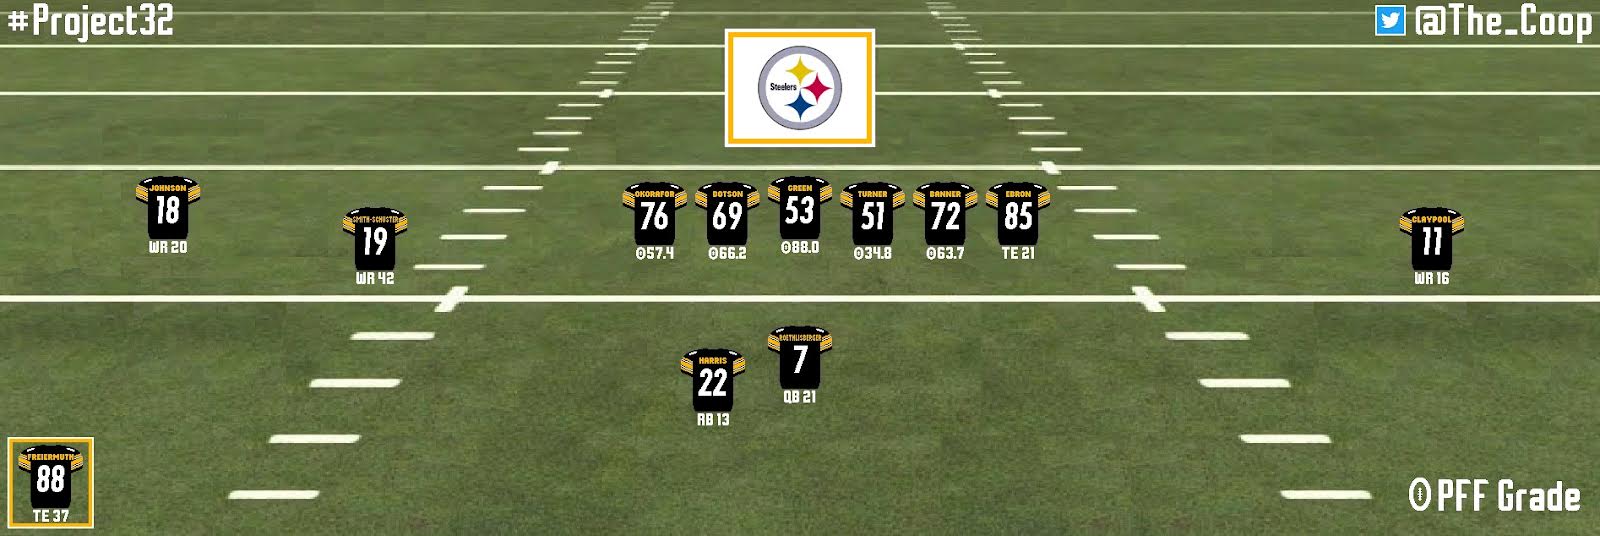 Pittsburgh Steelers 2021 projections